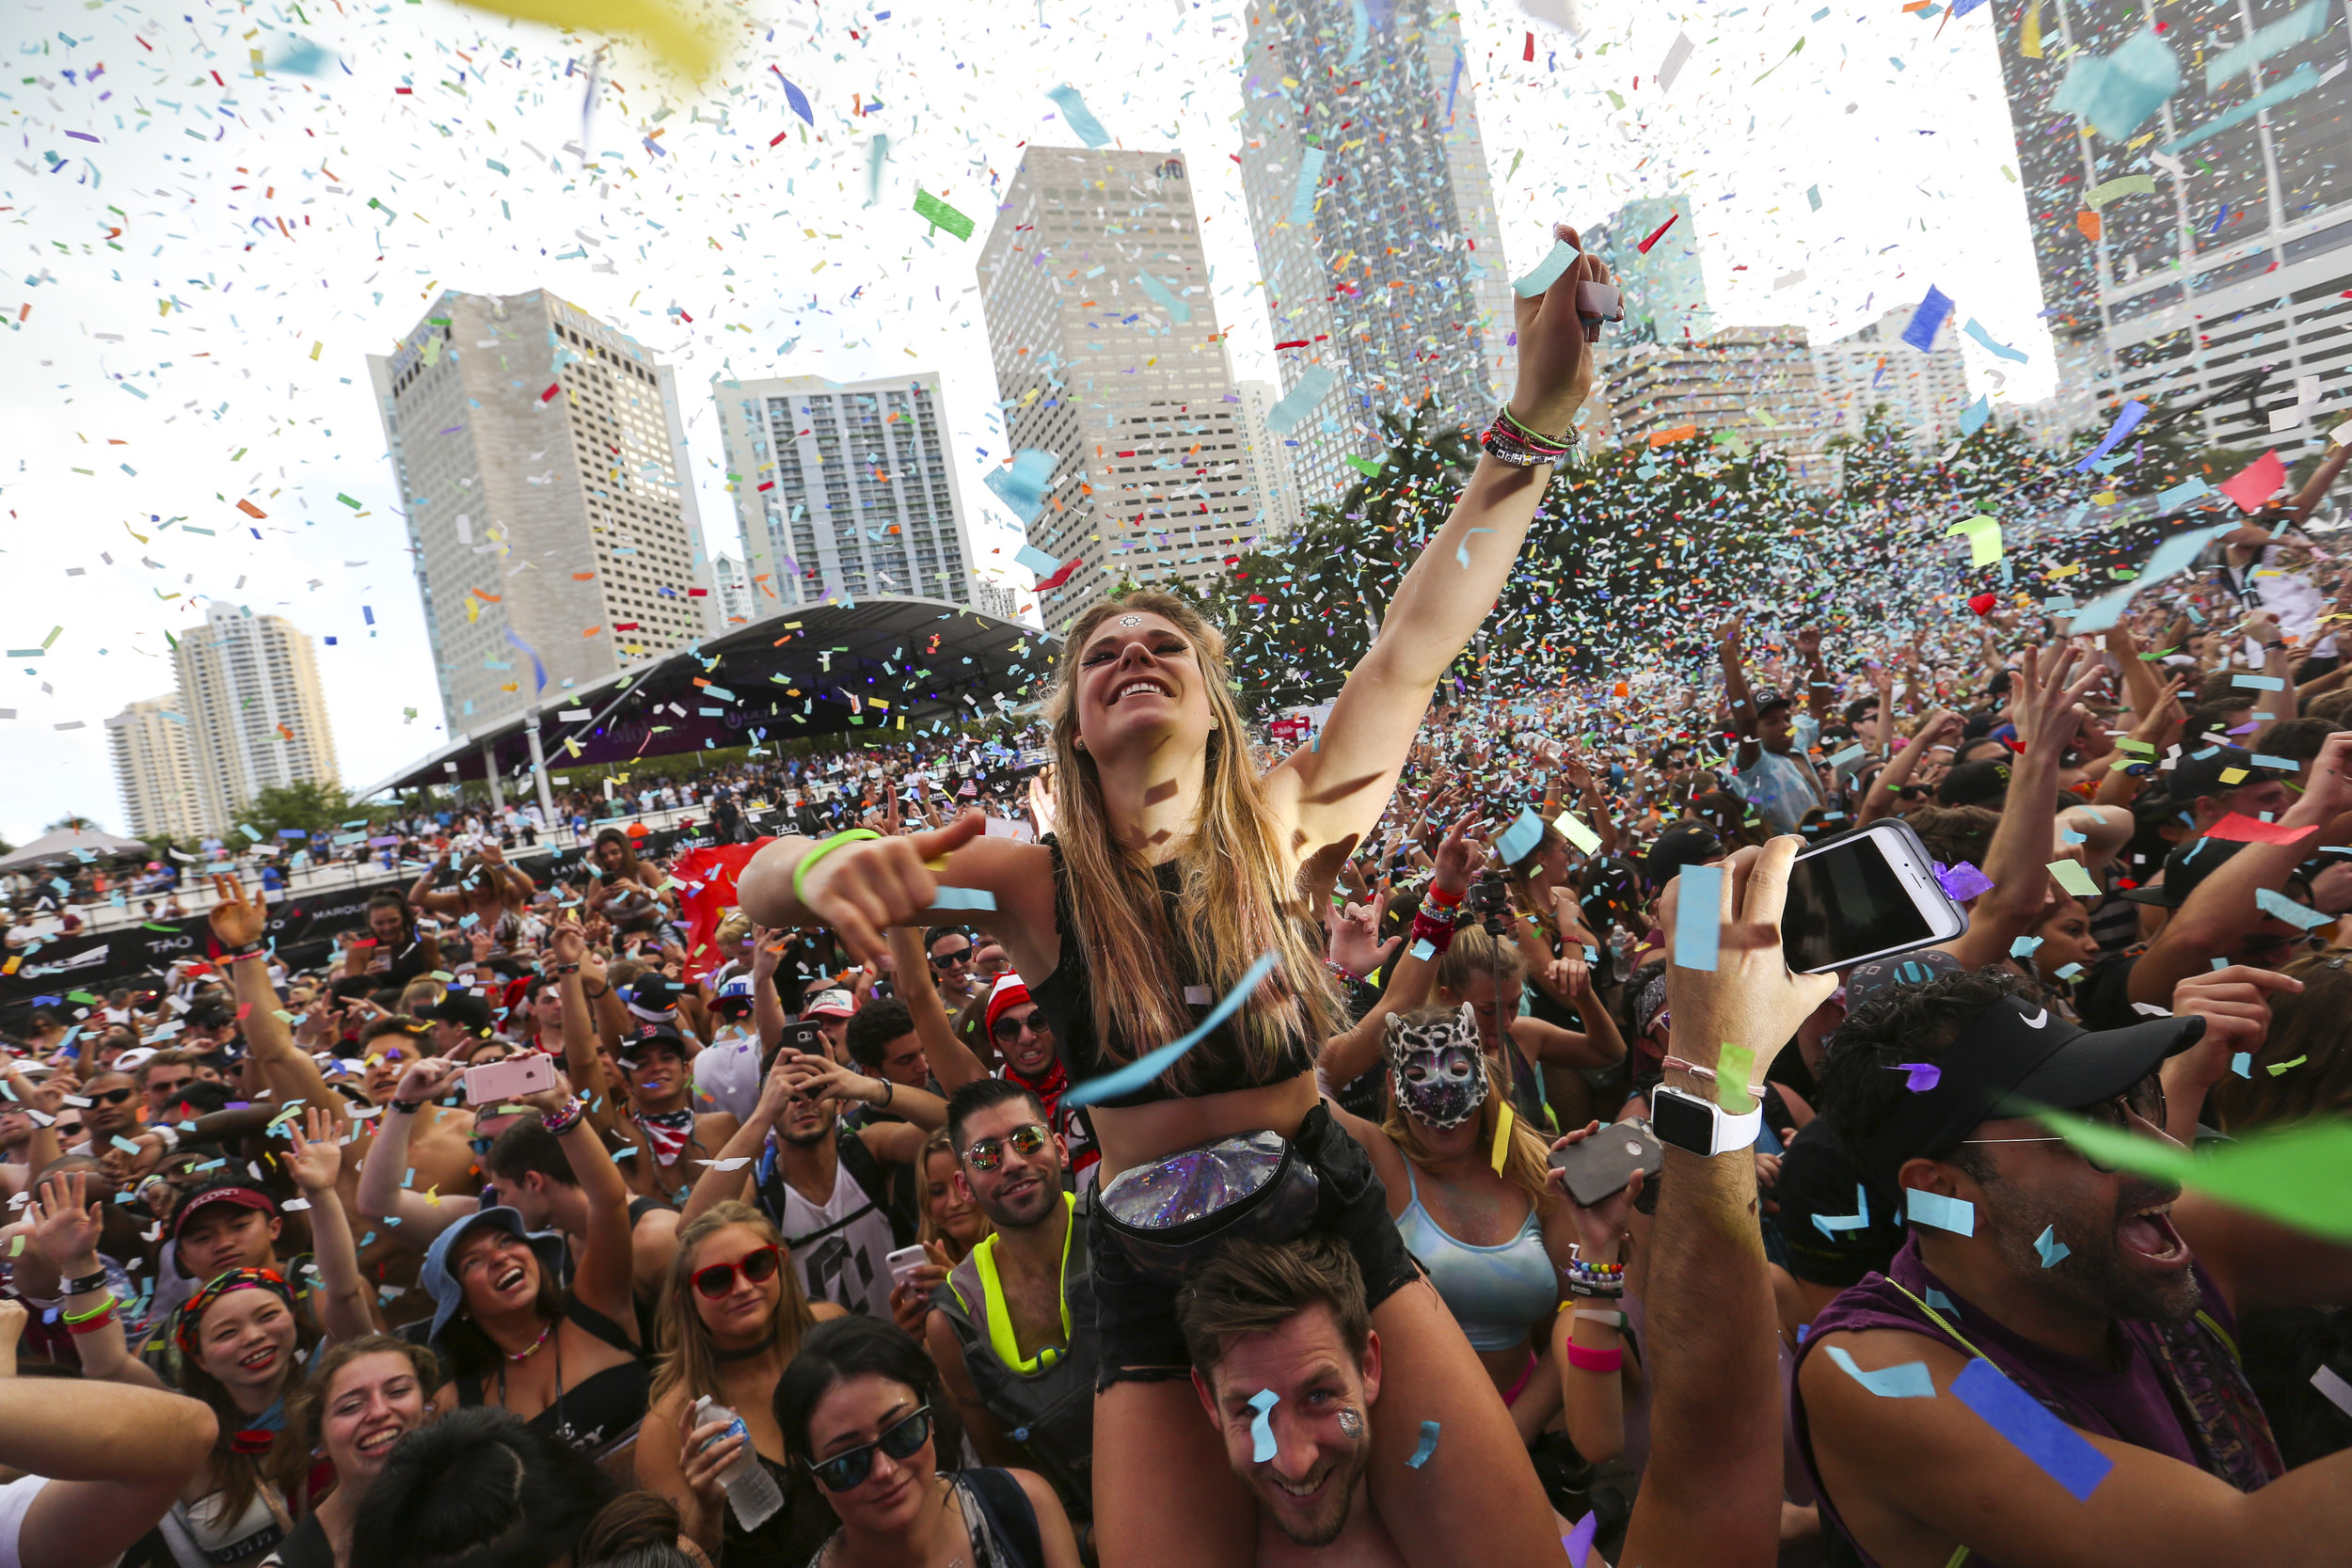  Alina Baum, 24, from Germany, dances as confetti sprinkles the crowd during the third day of Ultra Music Festival in downtown Miami on Sunday, March 26, 2017. 